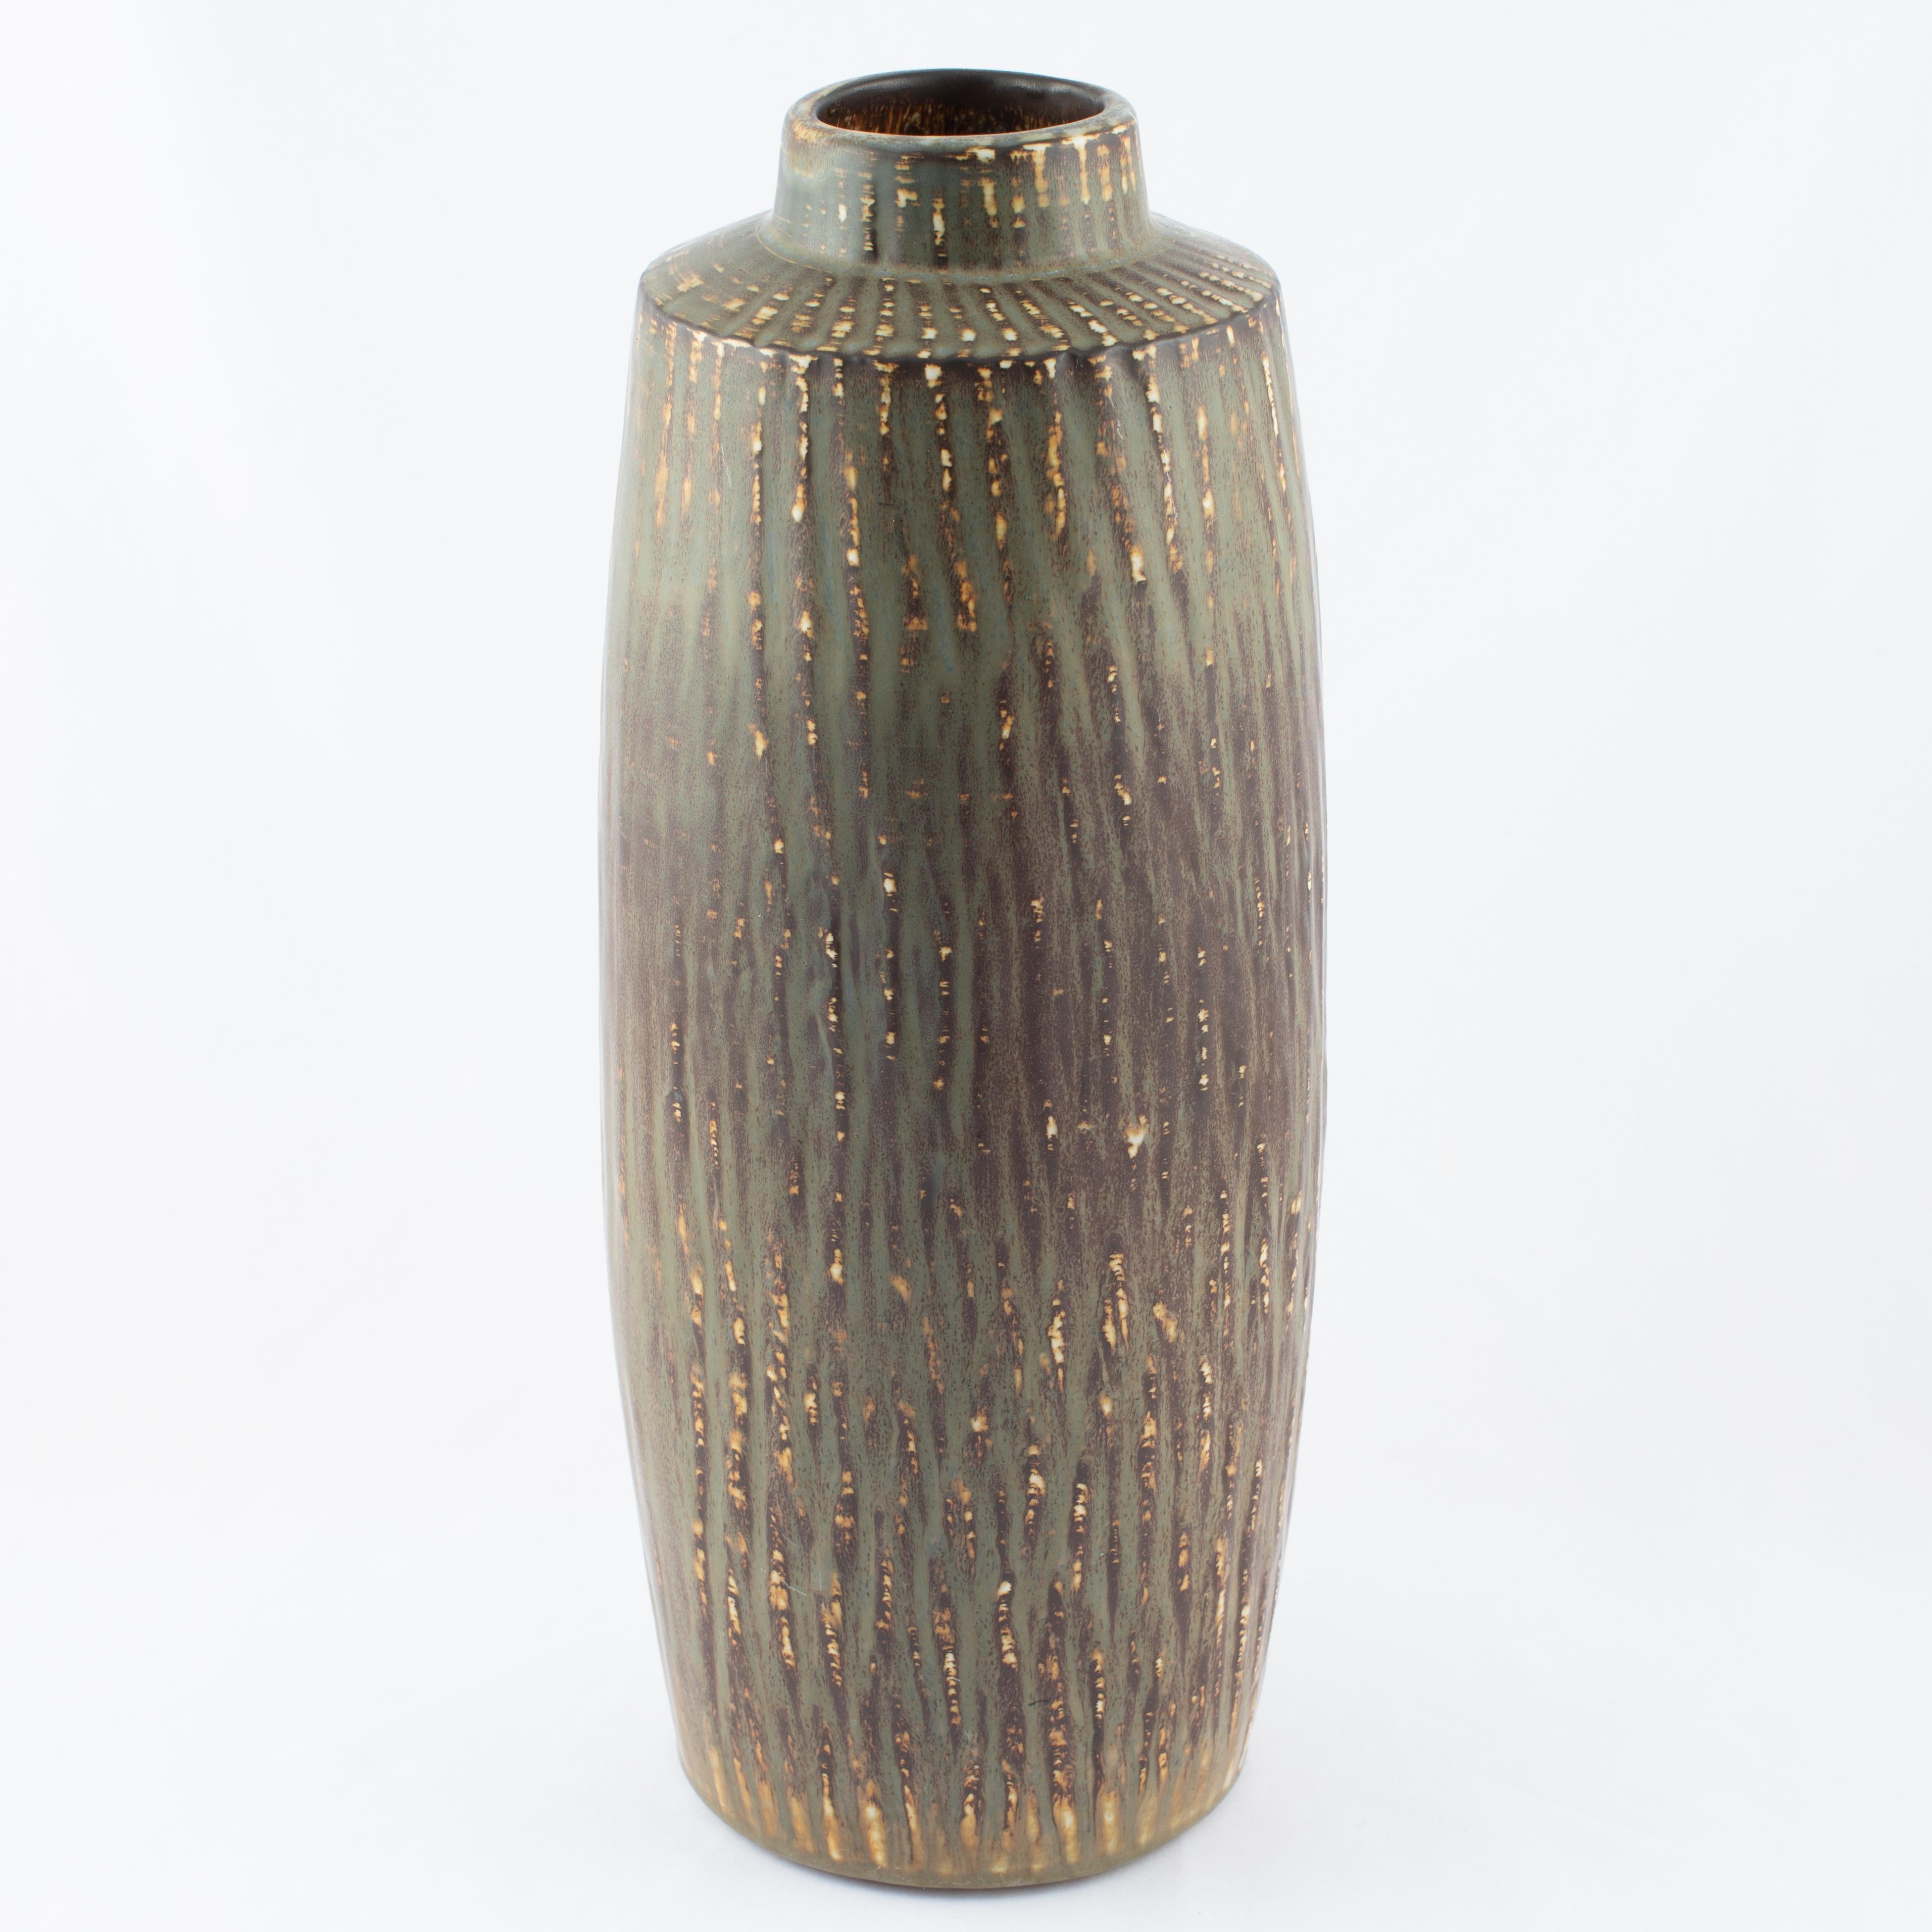 Monumental Gunnar Nylund cylindrical stoneware floor vase with mottled green and brown 